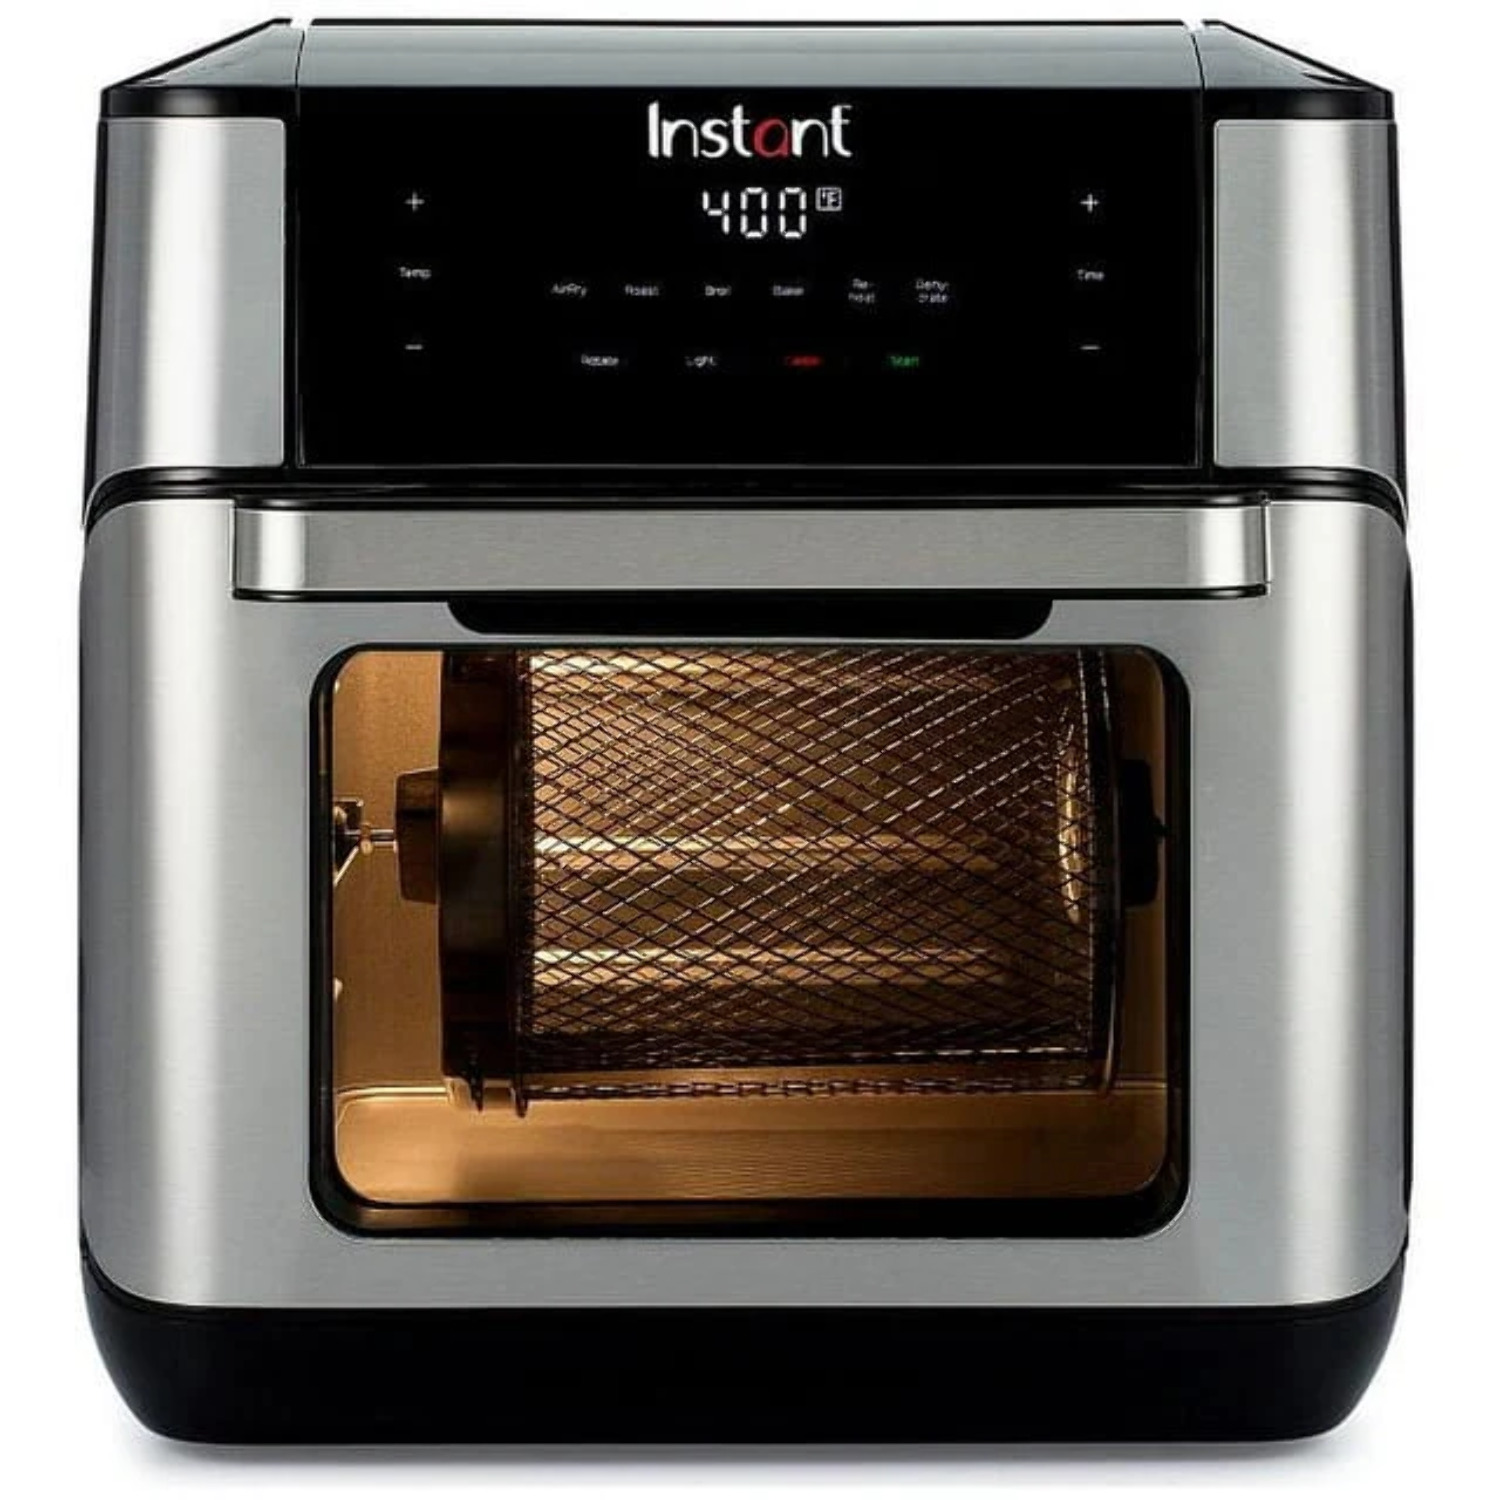 Instant Vortex Plus 10-Quart Air Fryer Oven with 7-in-1 Cooking Functions and Accessories Included, Stainless Steel - image 1 of 9